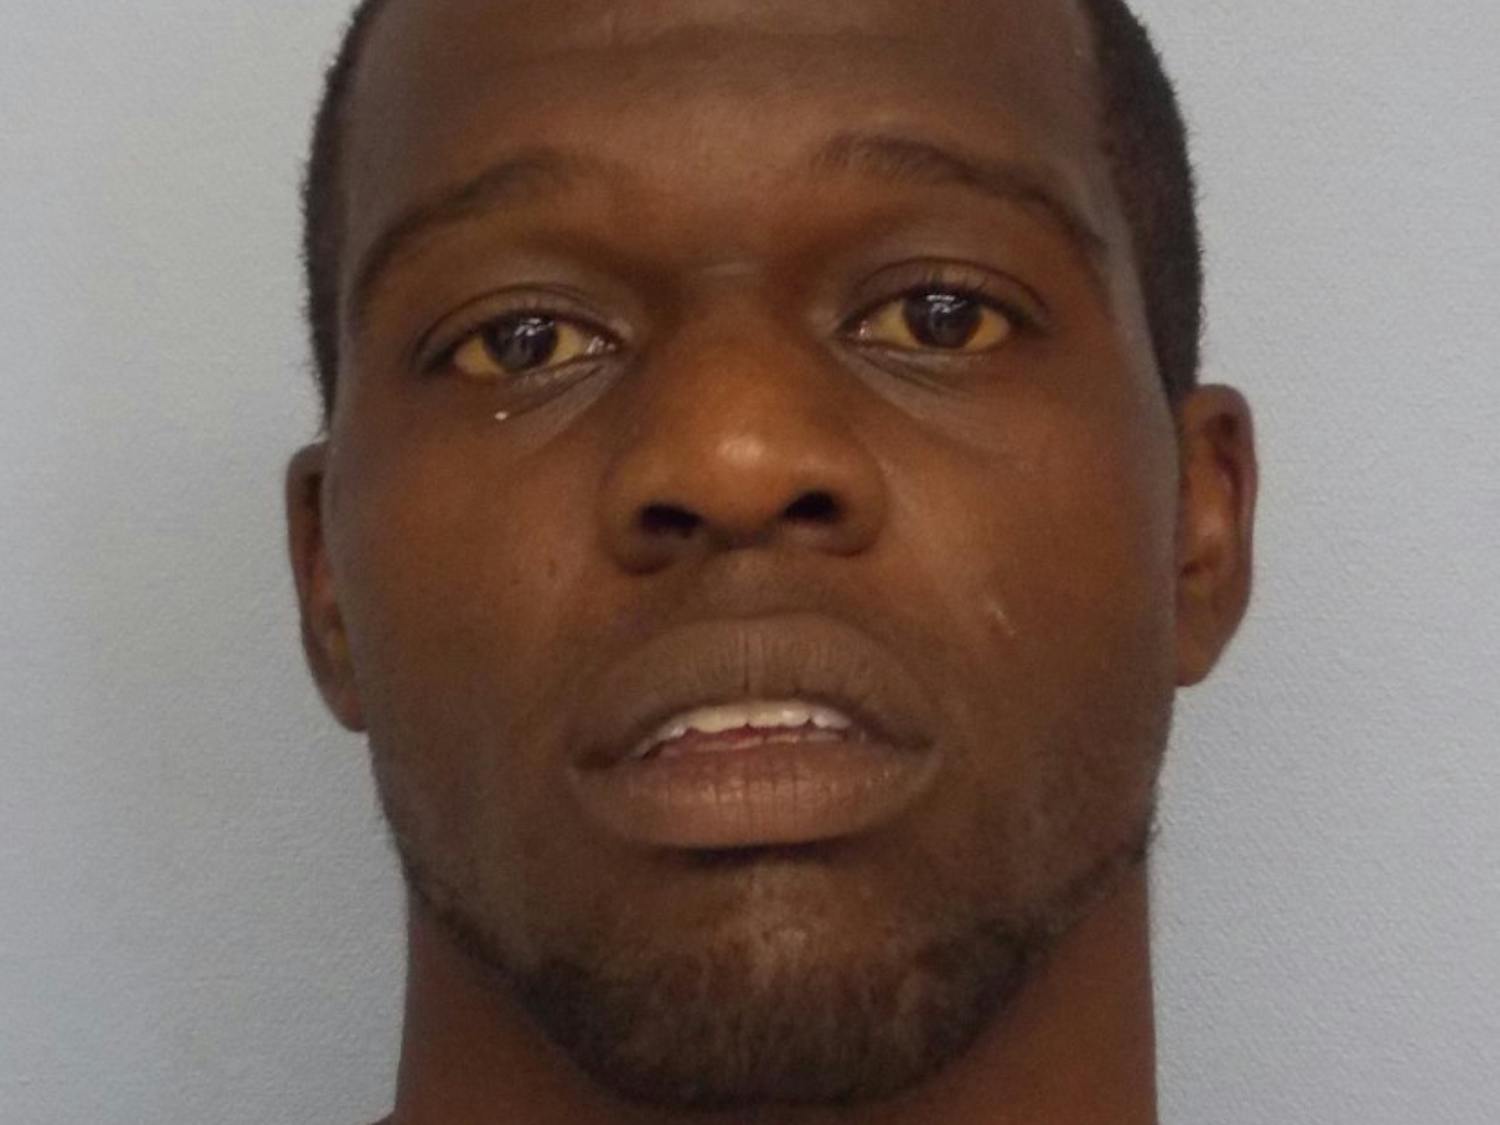 Police and the U.S. Marshals Gulf Coast Regional Fugitive Task Force arrested Demetrious A. Newell Jr., 26, from Cusseta, Alabama, on a warrant charging him with one count of murder.